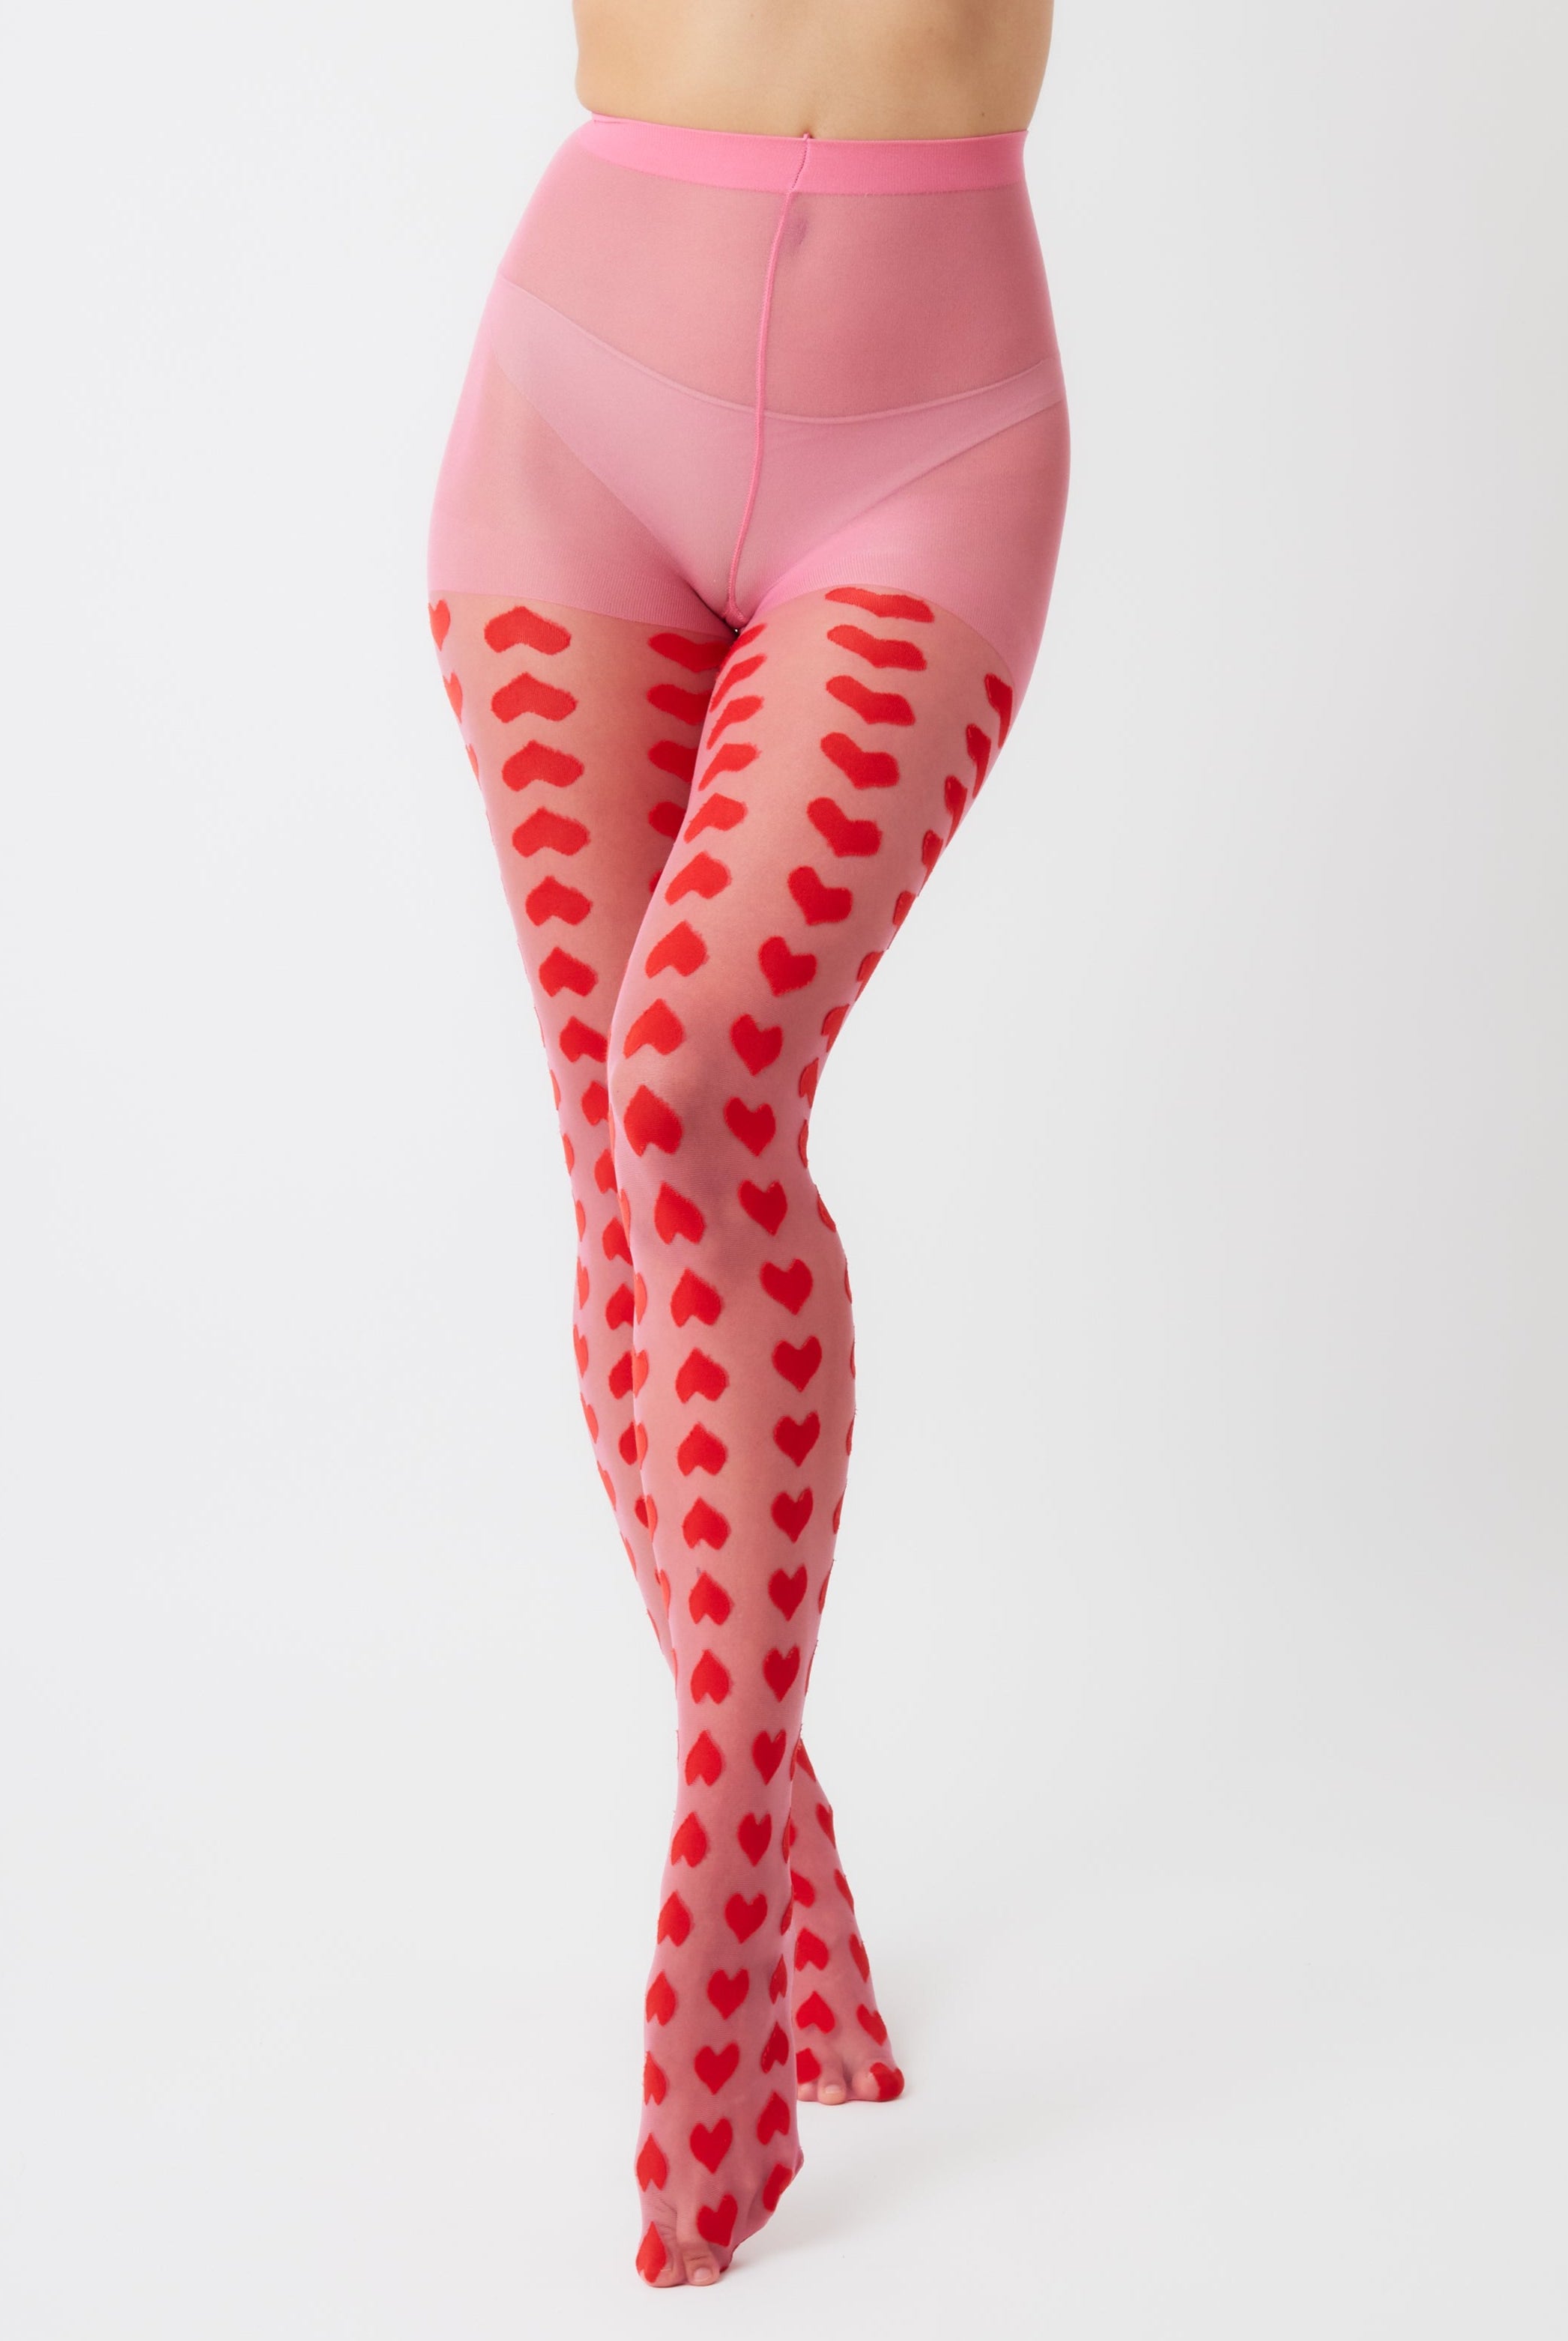 Heart monogram tights | pink tights | women's tights | fun tights | women's pink tights | Soft e girl | Weird girl | Fun | Playful | Kidcore | Quirky | Pin up | Halloween | Costume | Cosplay | Accessories